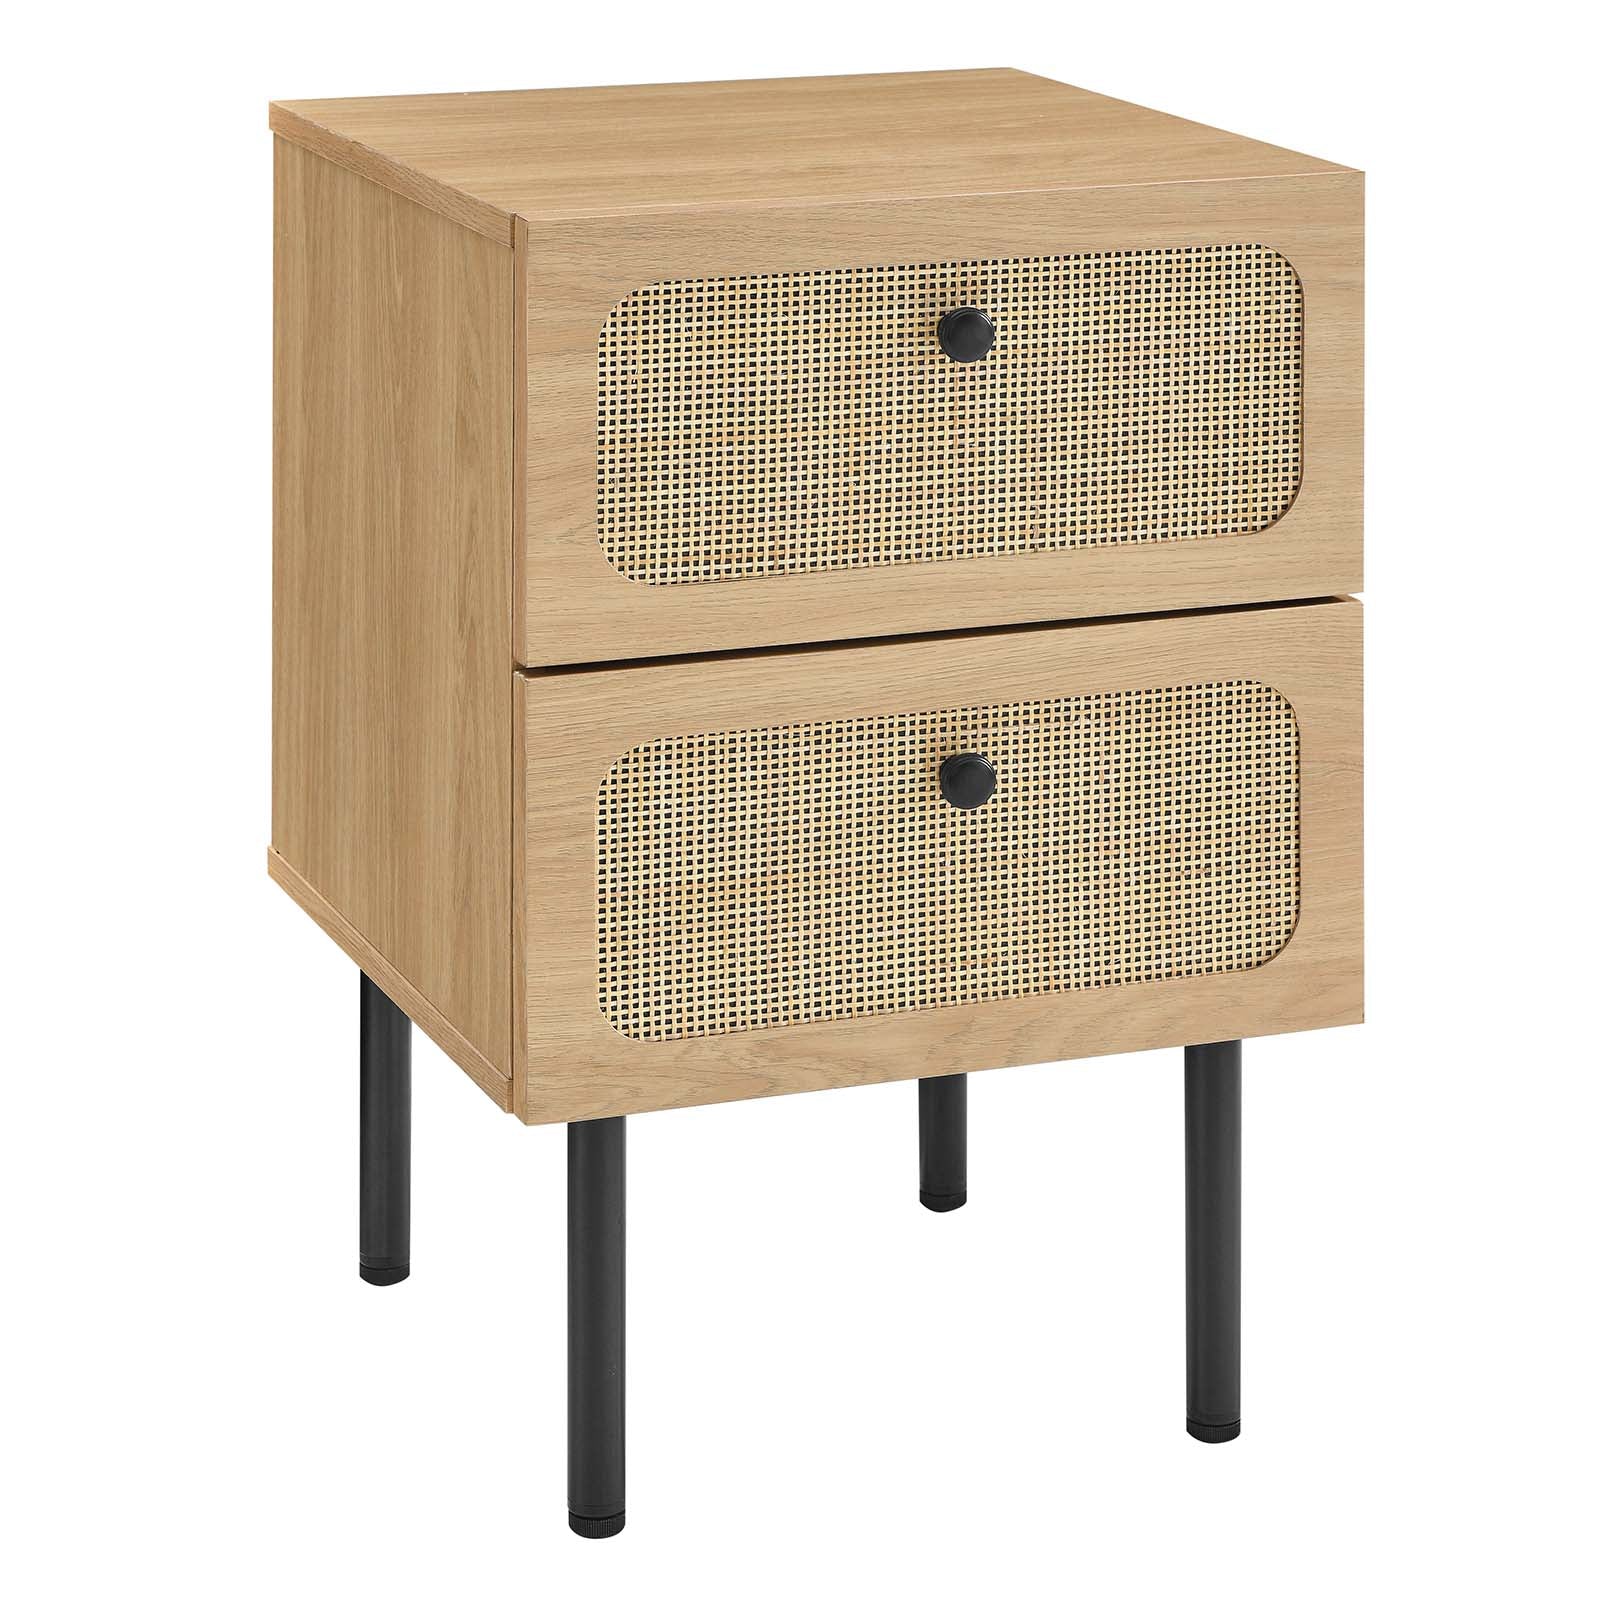 Chaucer 2-Drawer Nightstand - East Shore Modern Home Furnishings